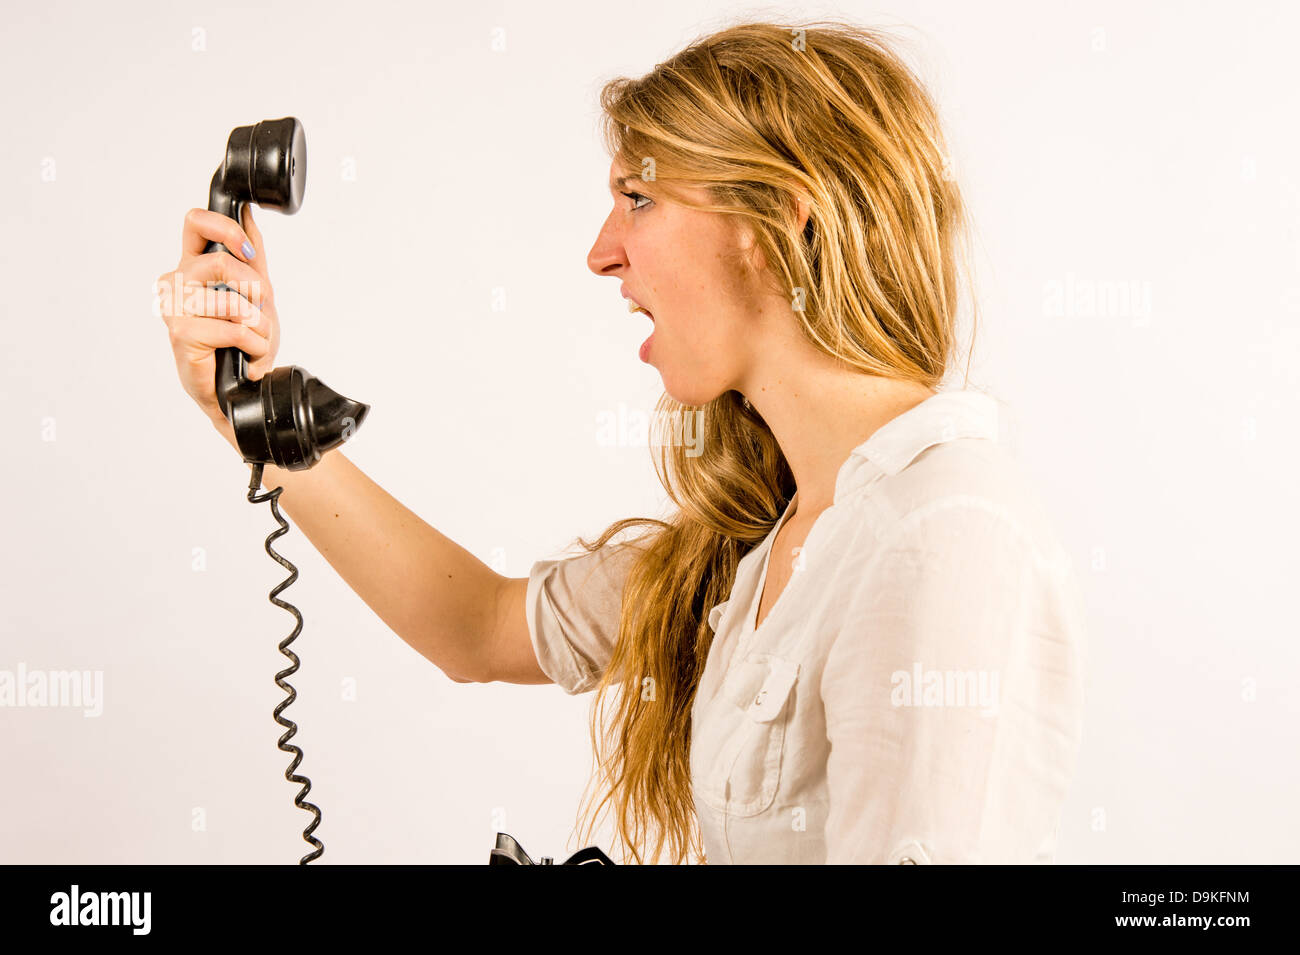 Poor customer helpline service: An angry young woman shouting yelling into an old retro telephone receiver - Stock Photo